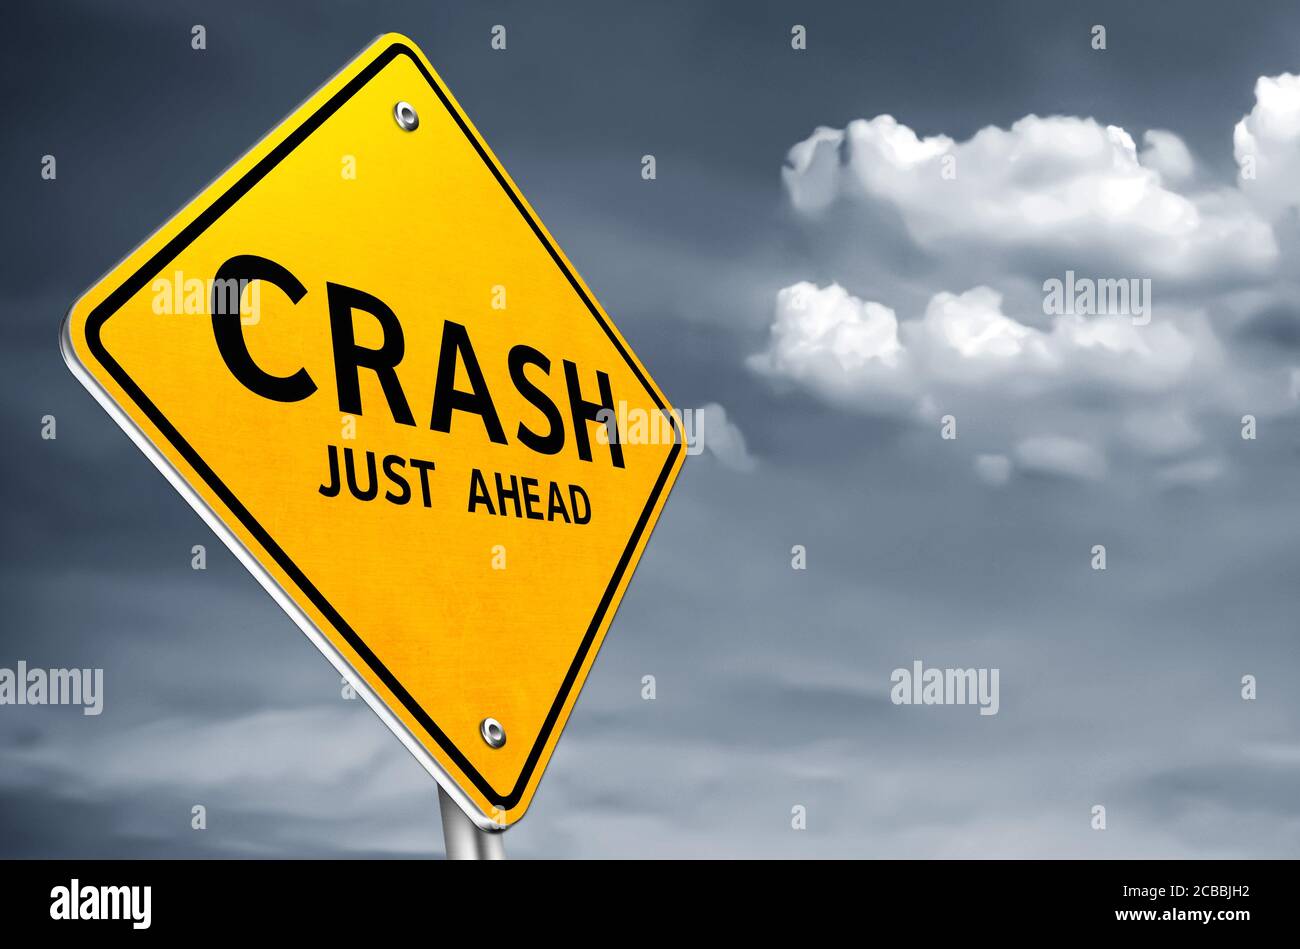 CRASH just ahead - road sign message Stock Photo